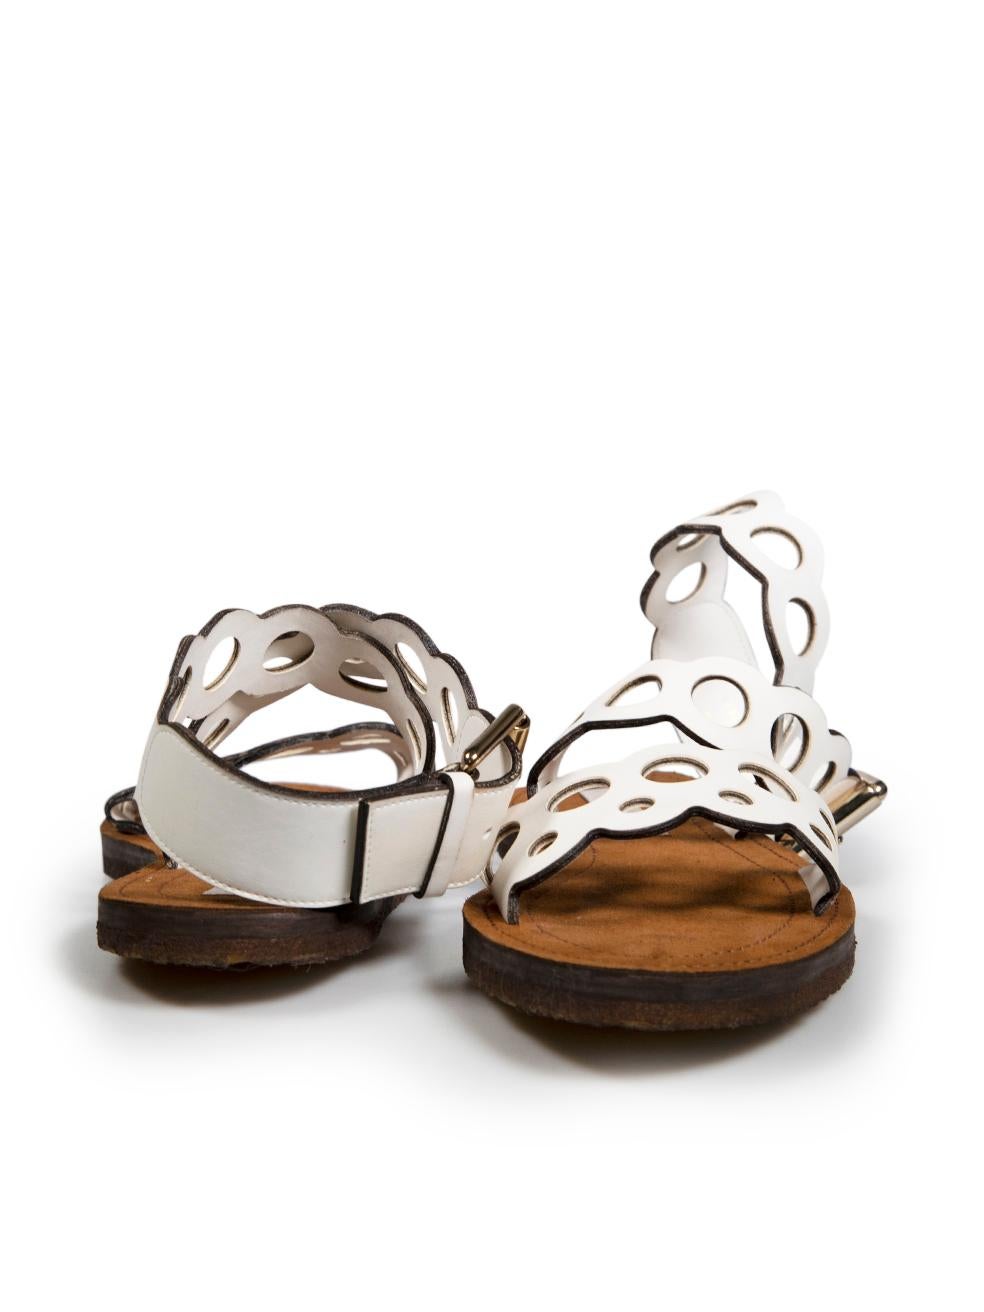 Stella McCartney White Leather Strap Sandals Size IT 38.5 In Good Condition For Sale In London, GB